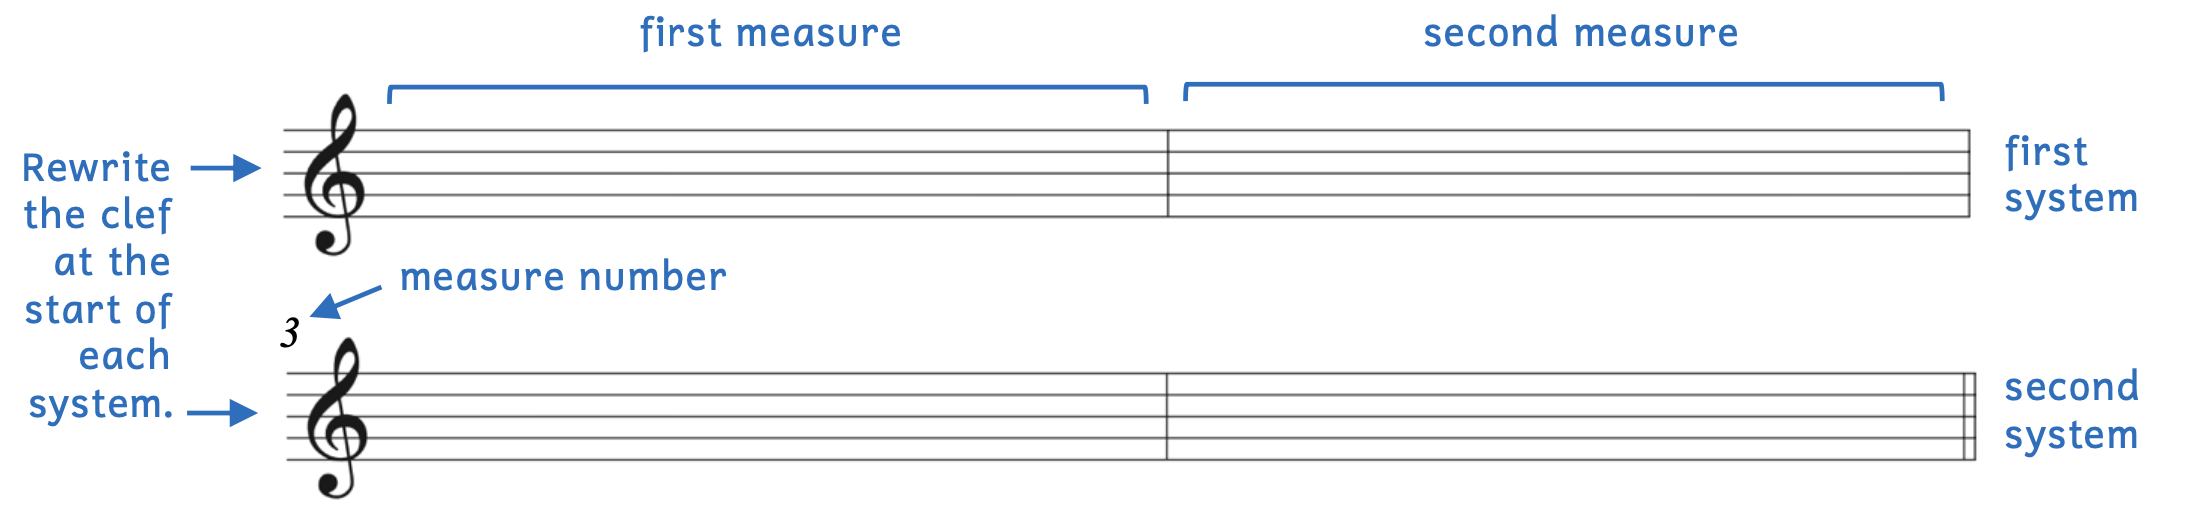 Two lines of staff with treble clef are shown. The first line is called the first system and the second line is called the second system. Rewrite the clef at the start of each system. Each bar line separates measures, so the first area between the beginning and the first bar line is the first measure. The next area between bar lines is the second measure. In the second system, the number 3 appears at the top left hand corner. This is the measure number that begins that system.